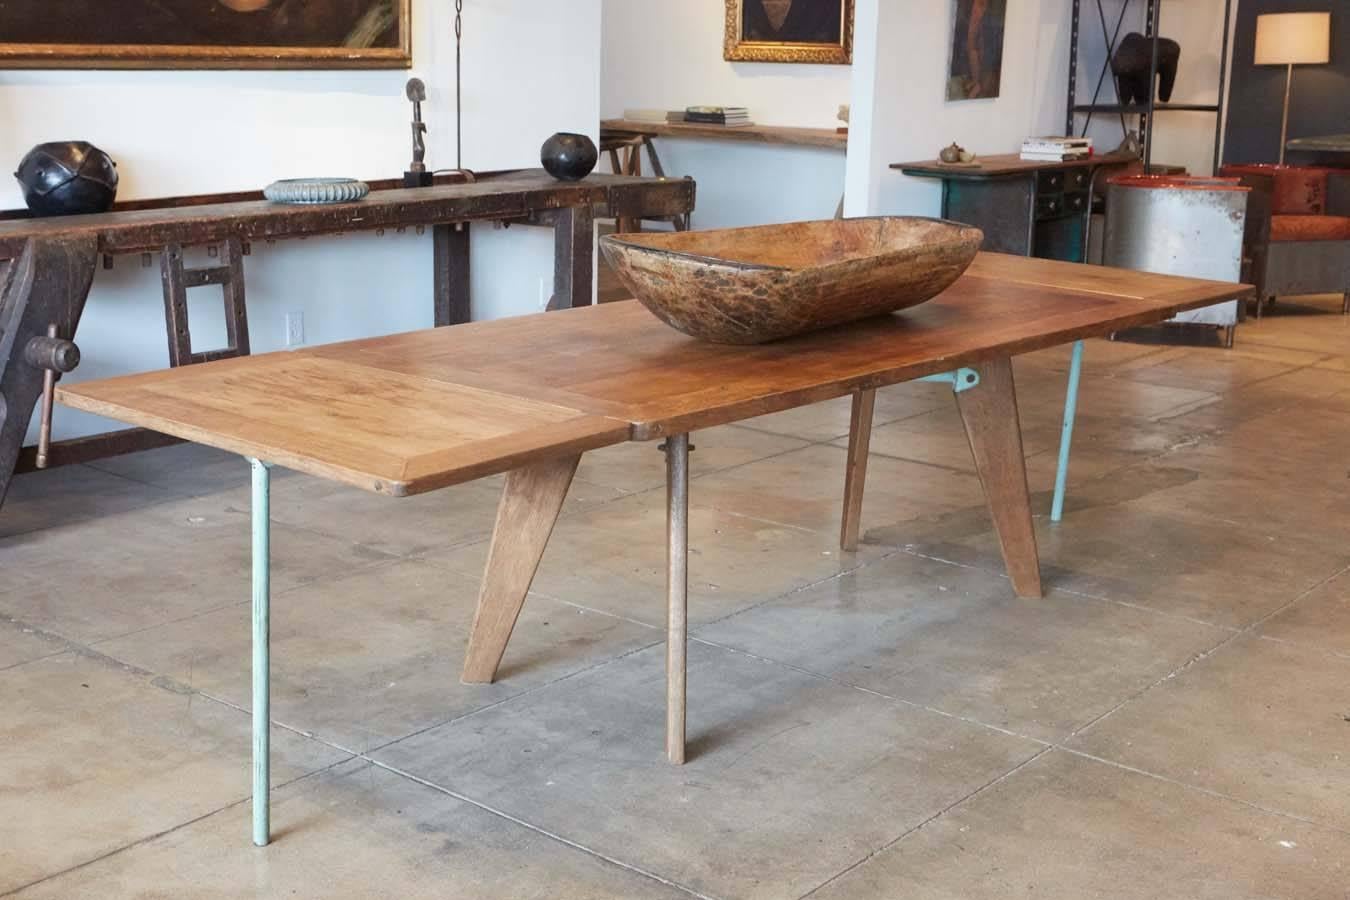 French Jean Prouvé Table with Extenders, France, 1949 Jean Prouvé Ateliers